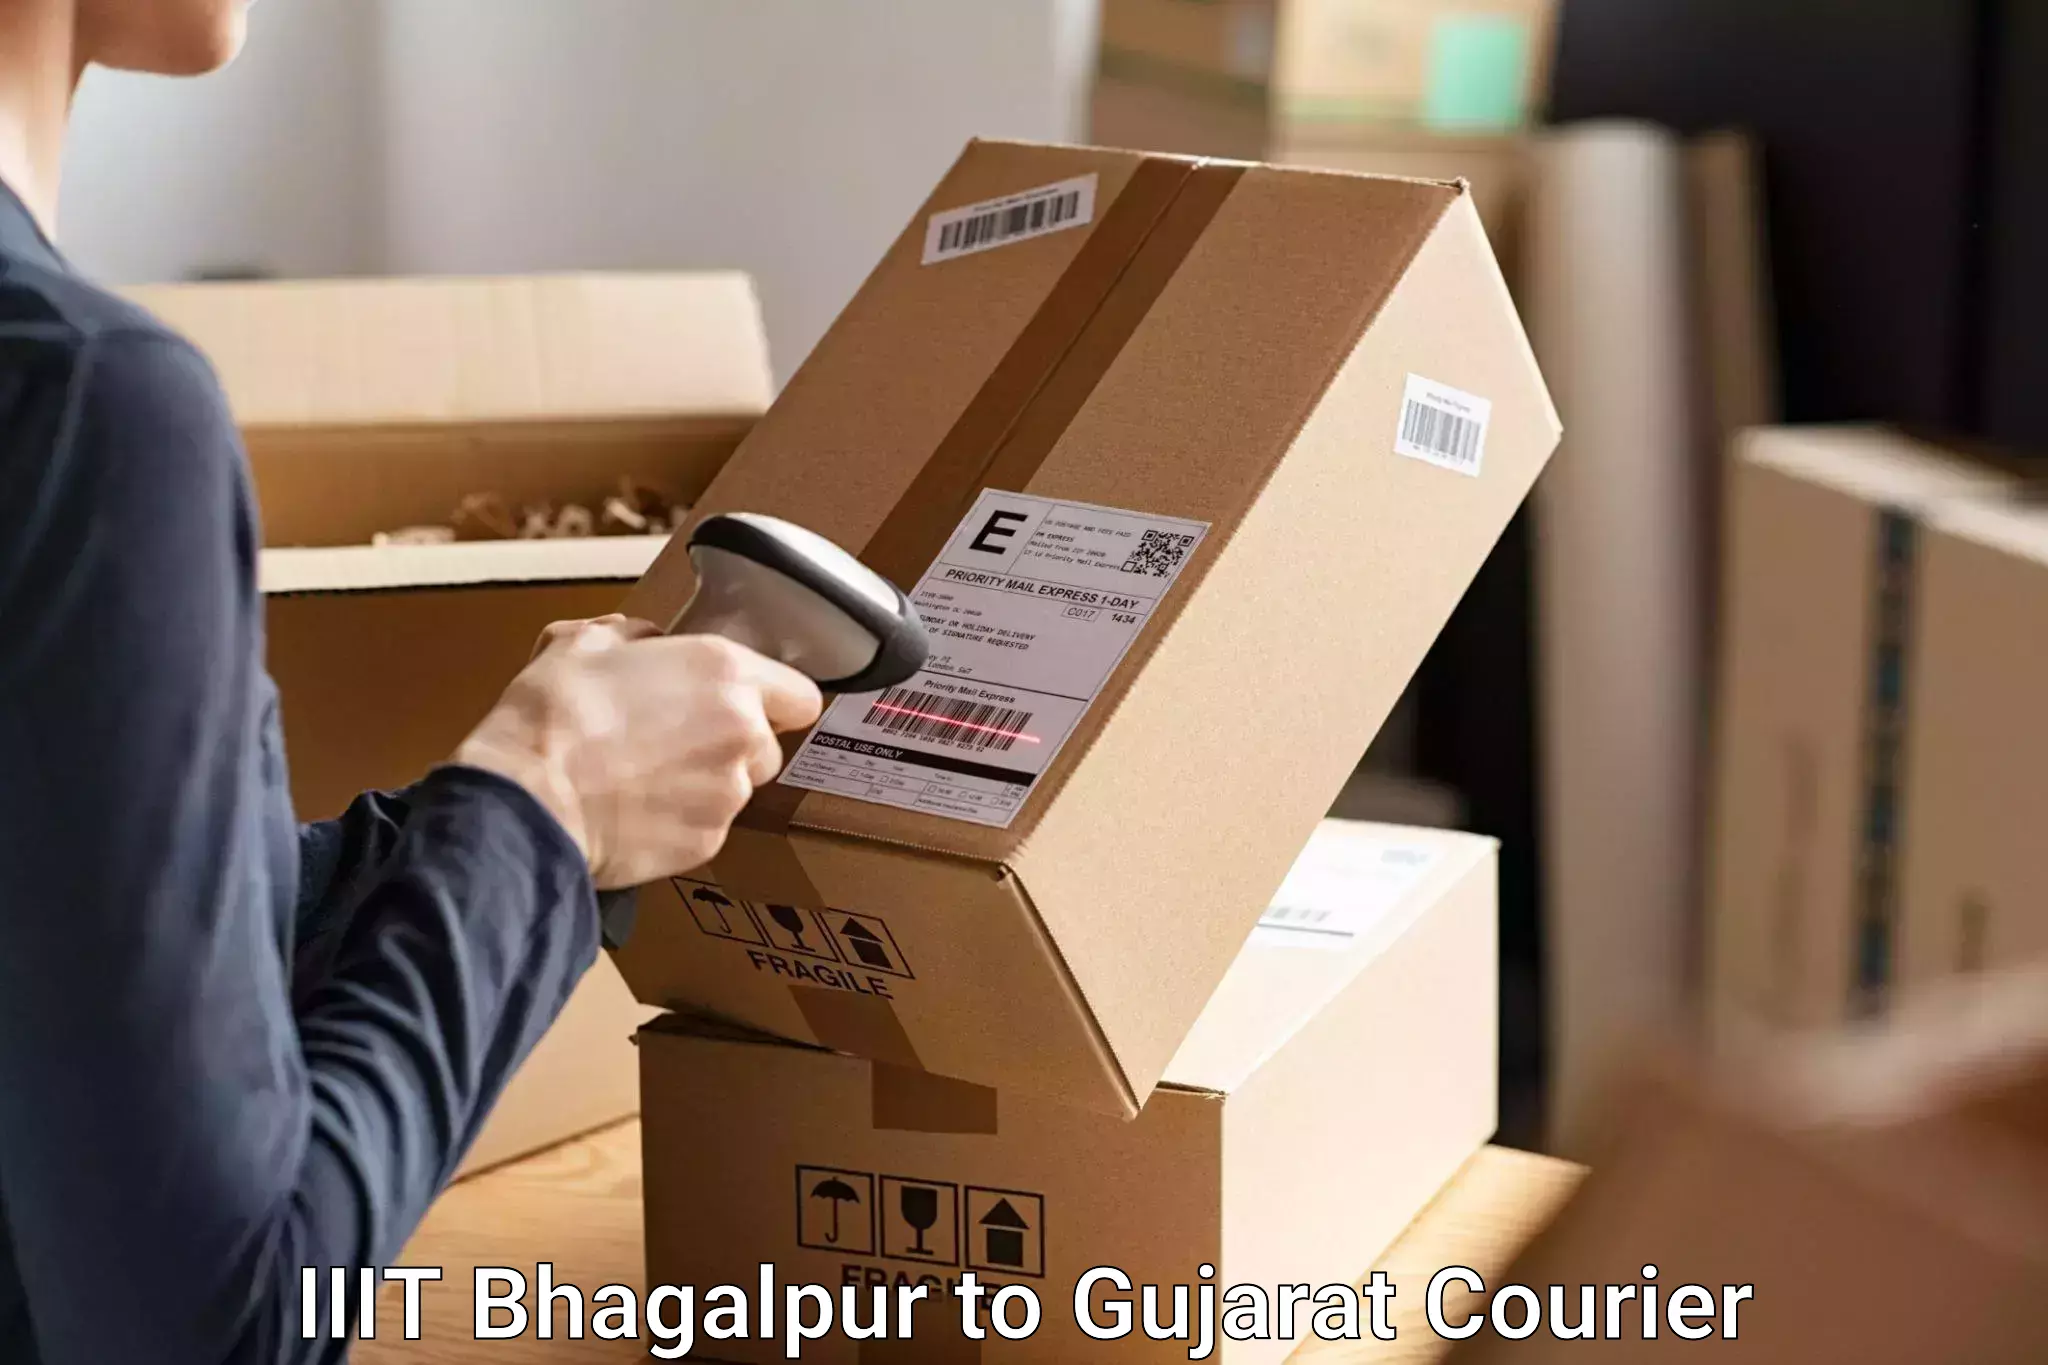 Personal effects shipping IIIT Bhagalpur to Surat